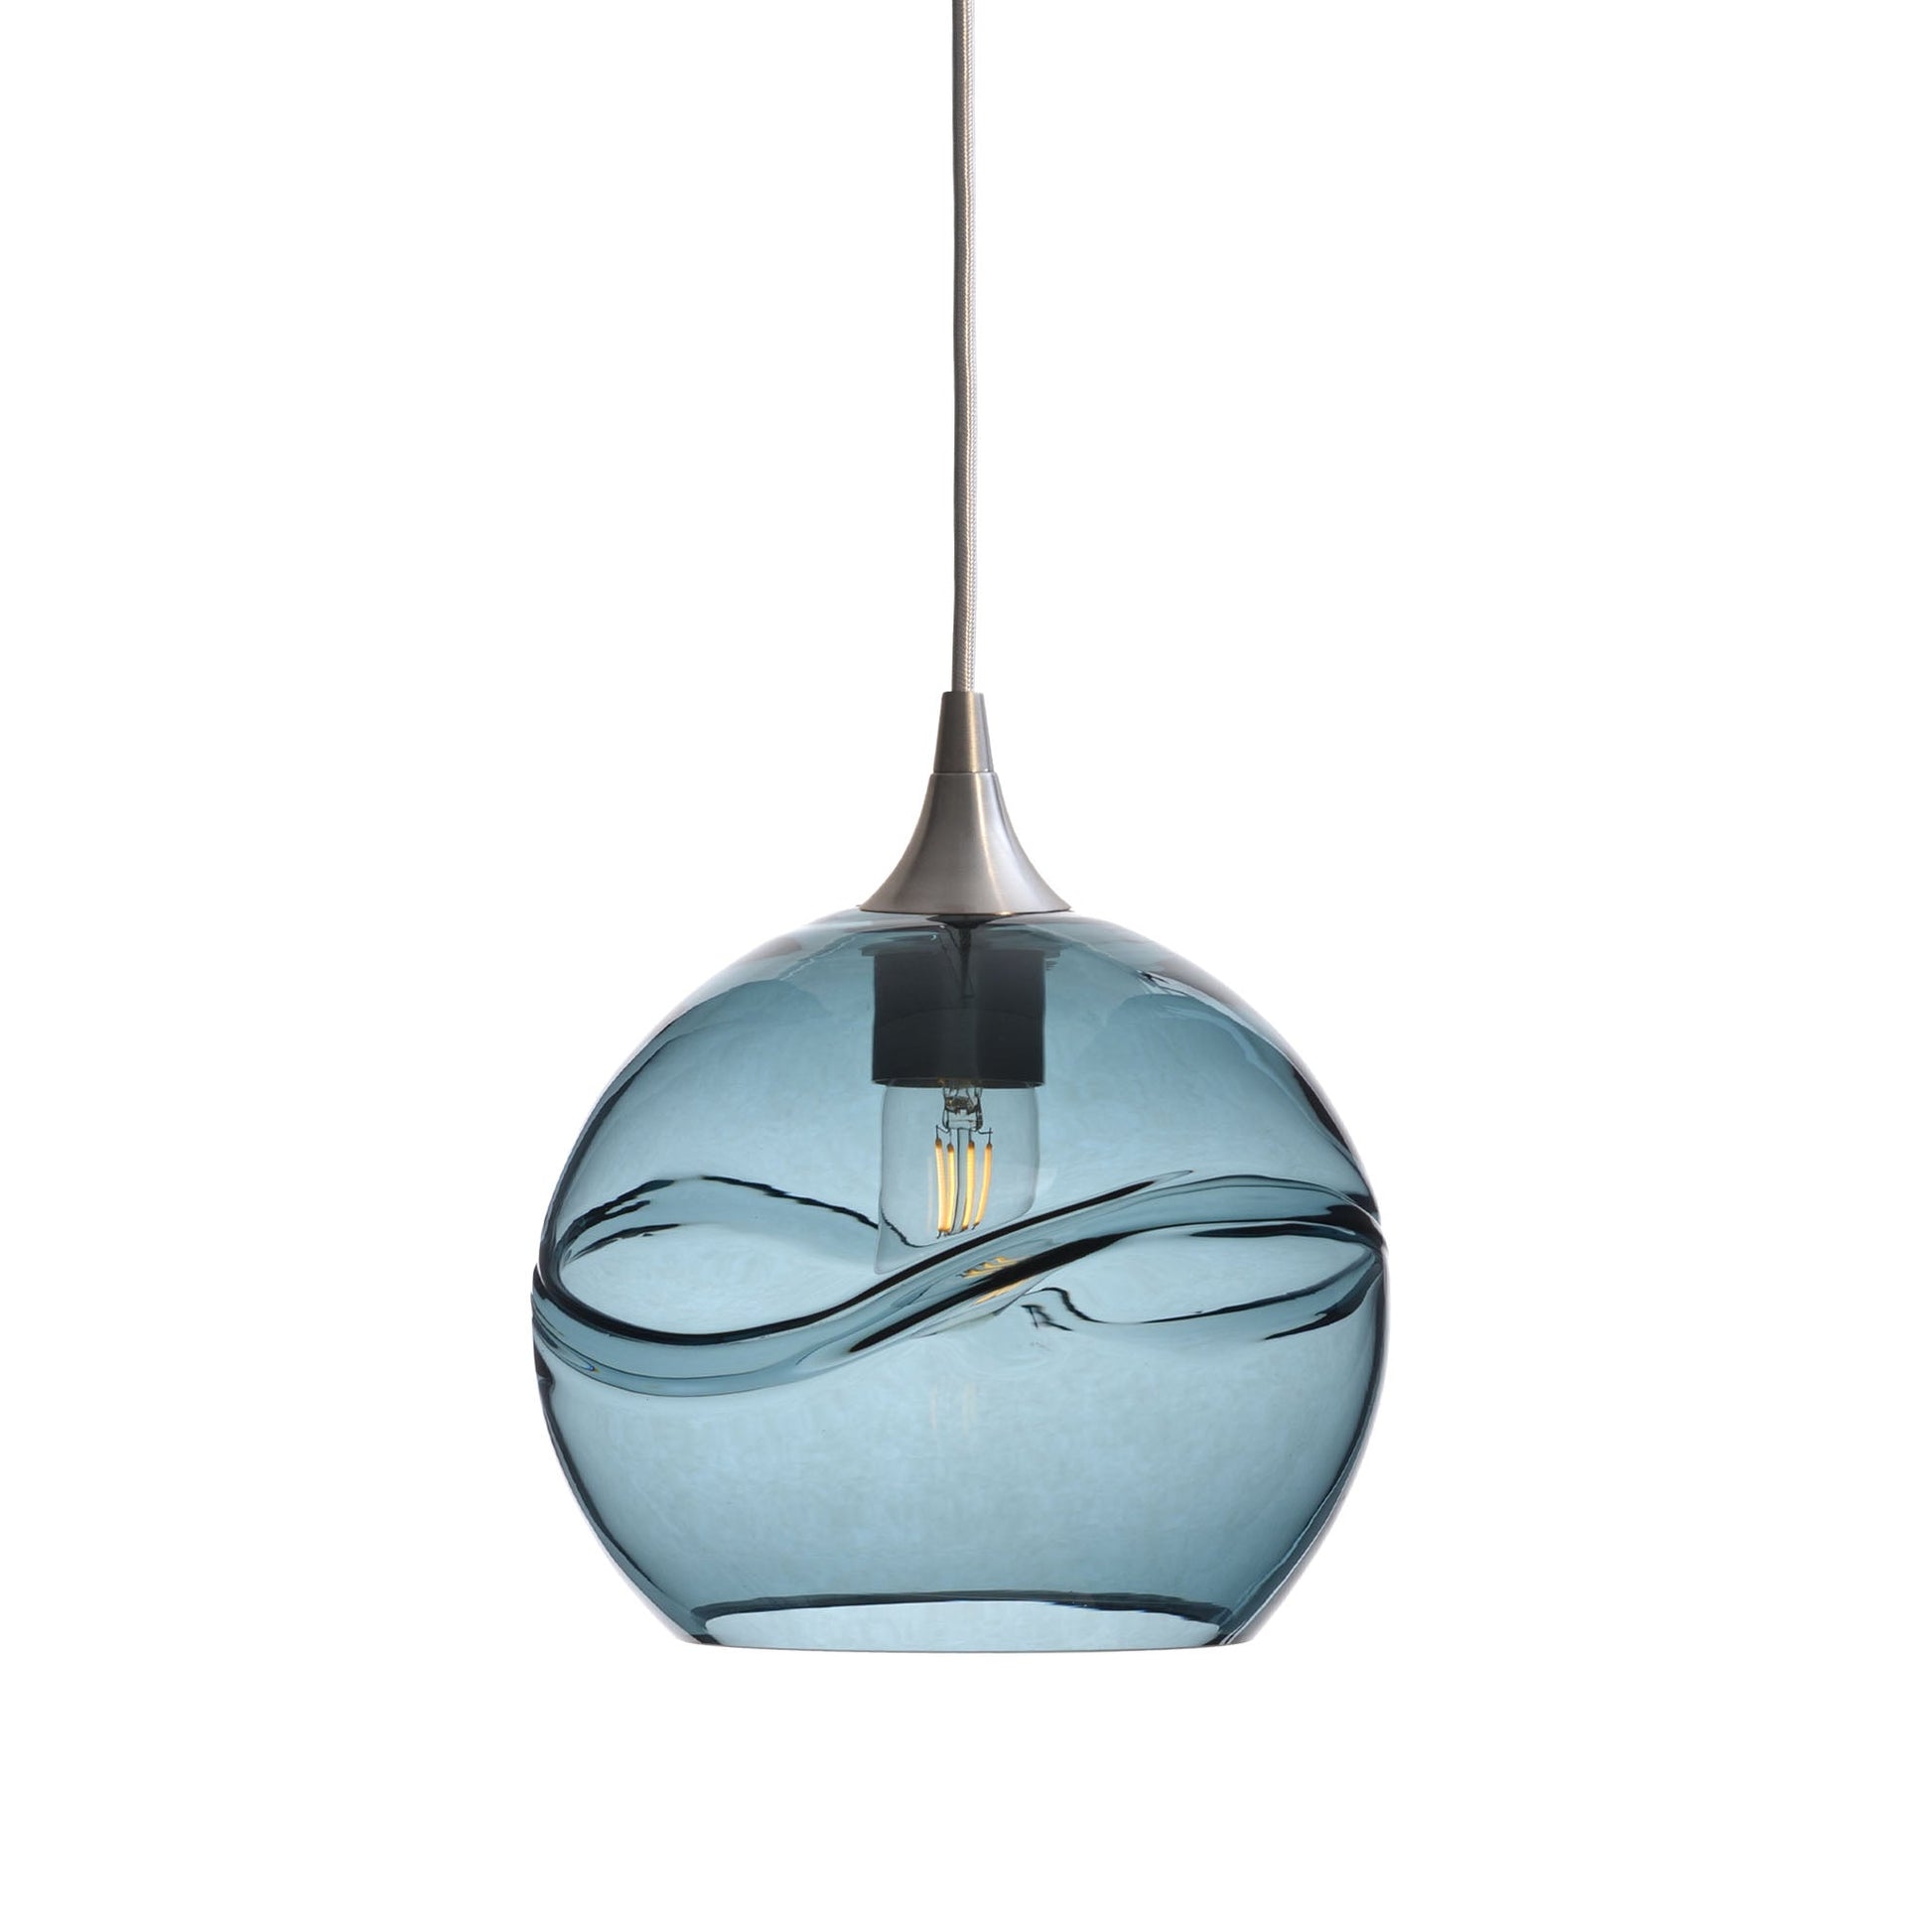 768 Swell: Single Pendant Light-Glass-Bicycle Glass Co - Hotshop-Slate Gray-Brushed Nickel-Bicycle Glass Co